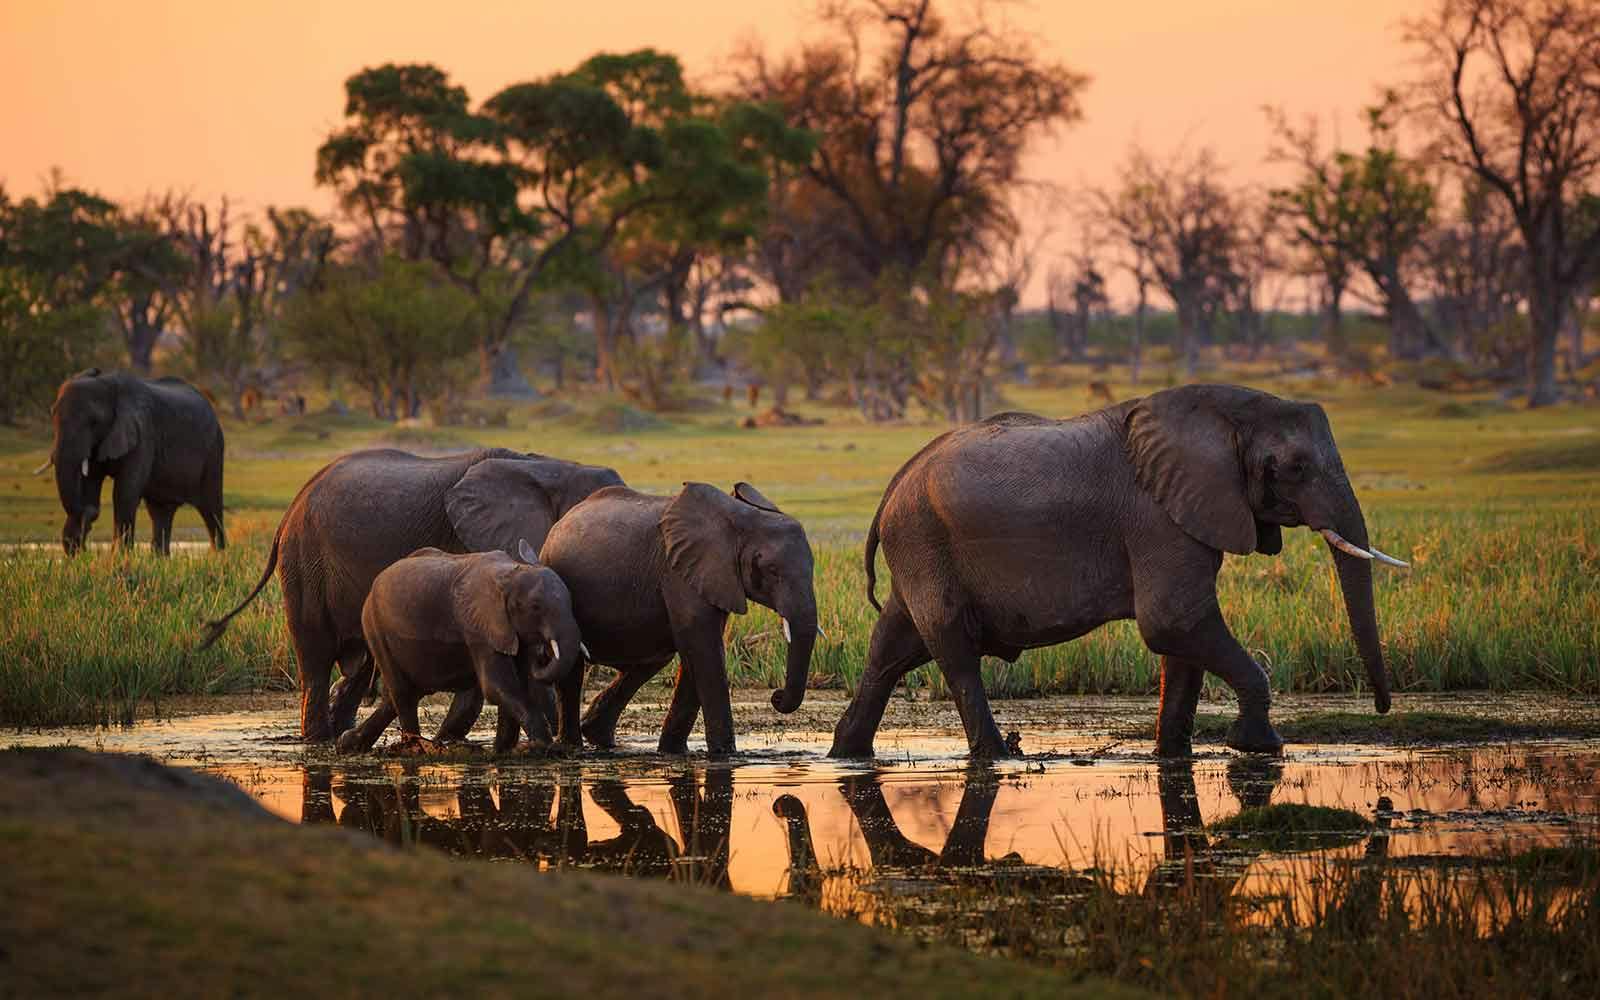 A group of elephants from Africa walking through a waterhole at sunset.